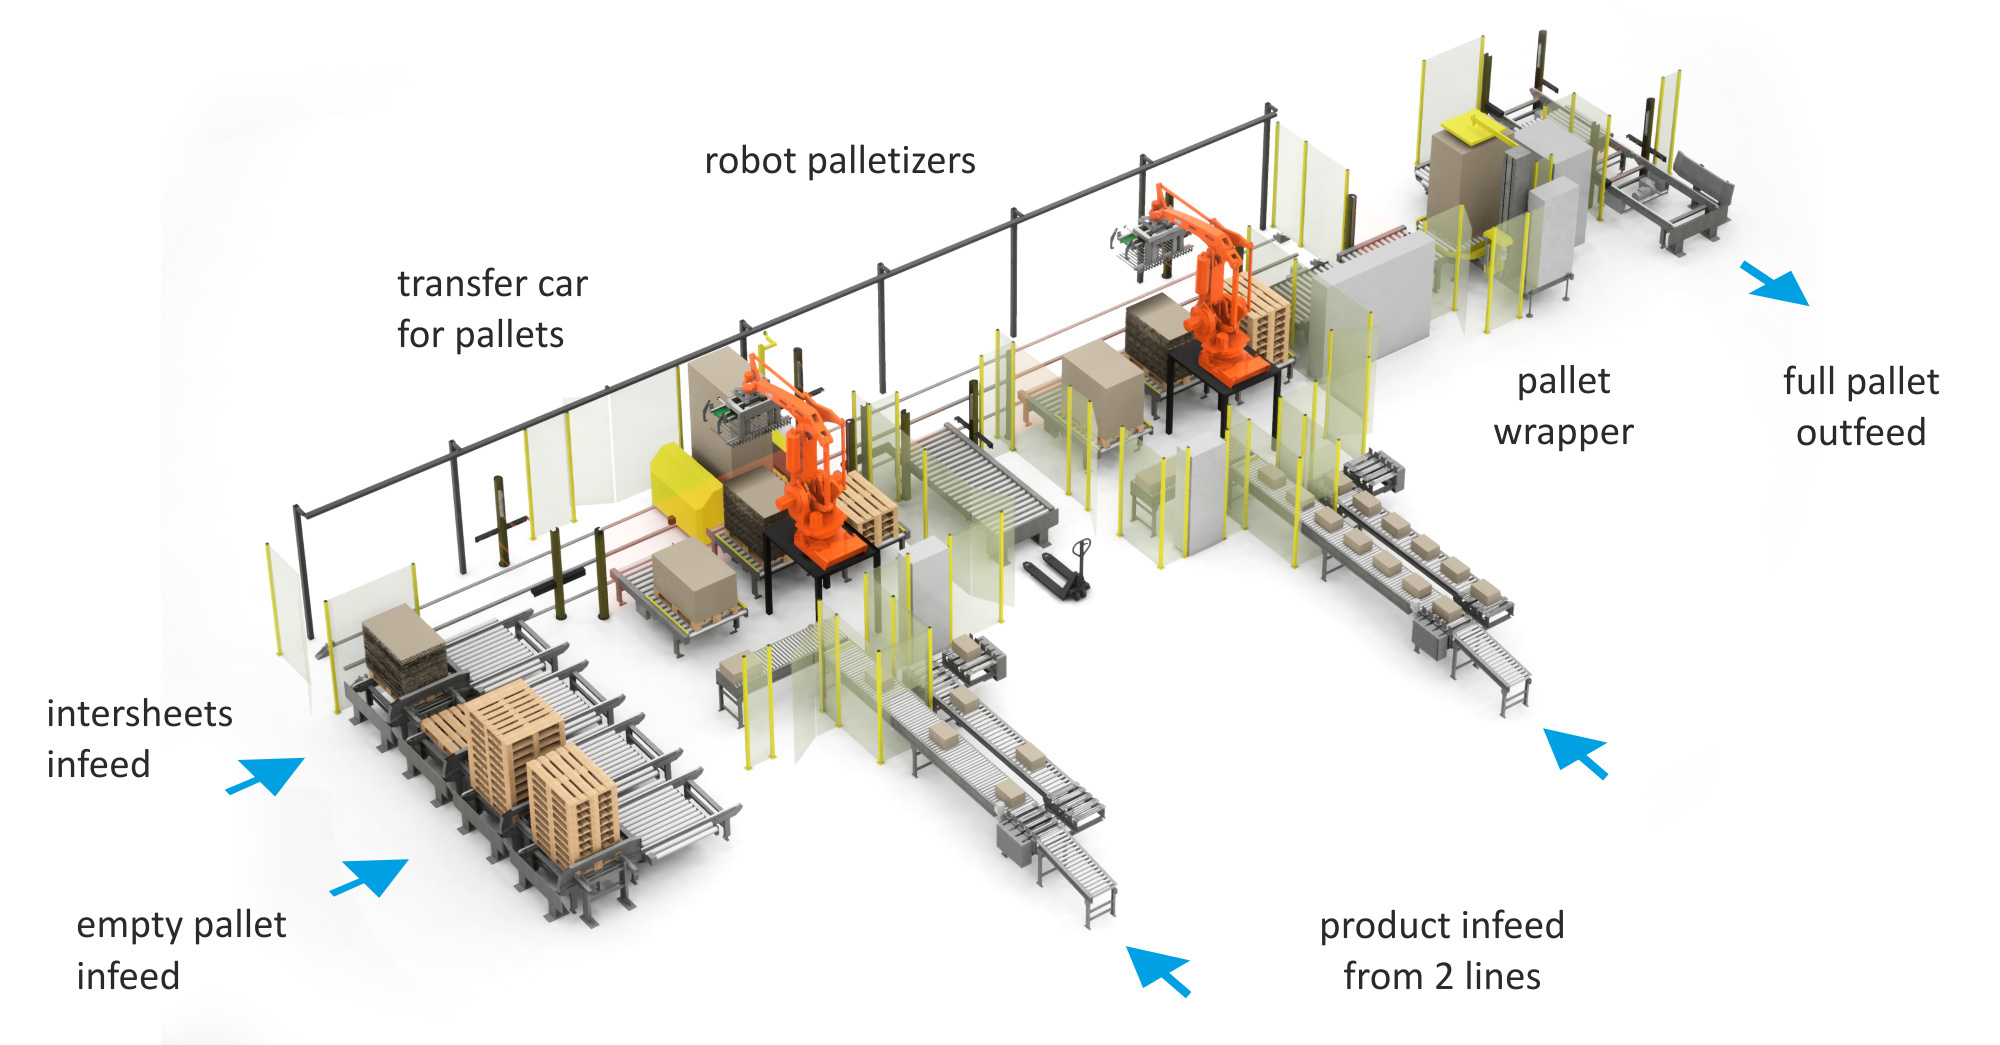 Example of a robotic palletizing system